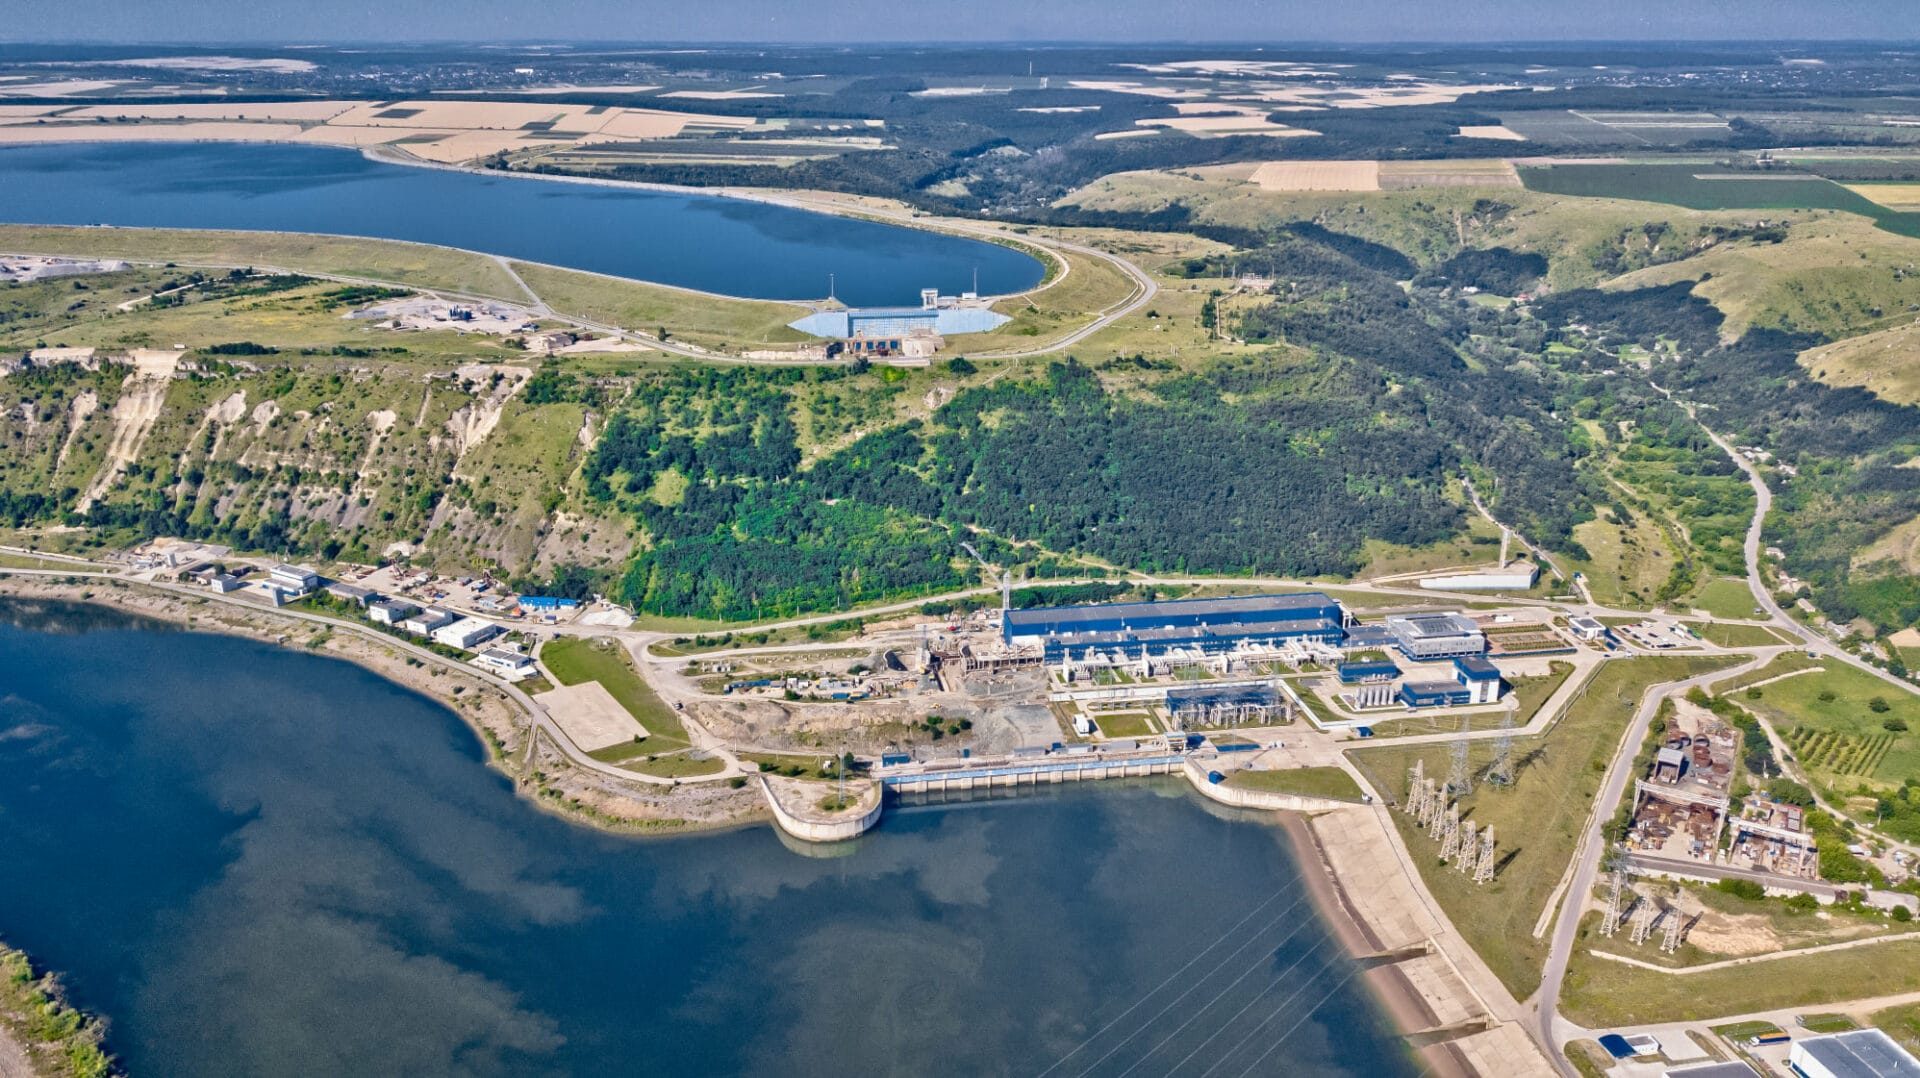 The Dniester HPSPP is one of Europe’s largest hydroelectric pumped storage power plants